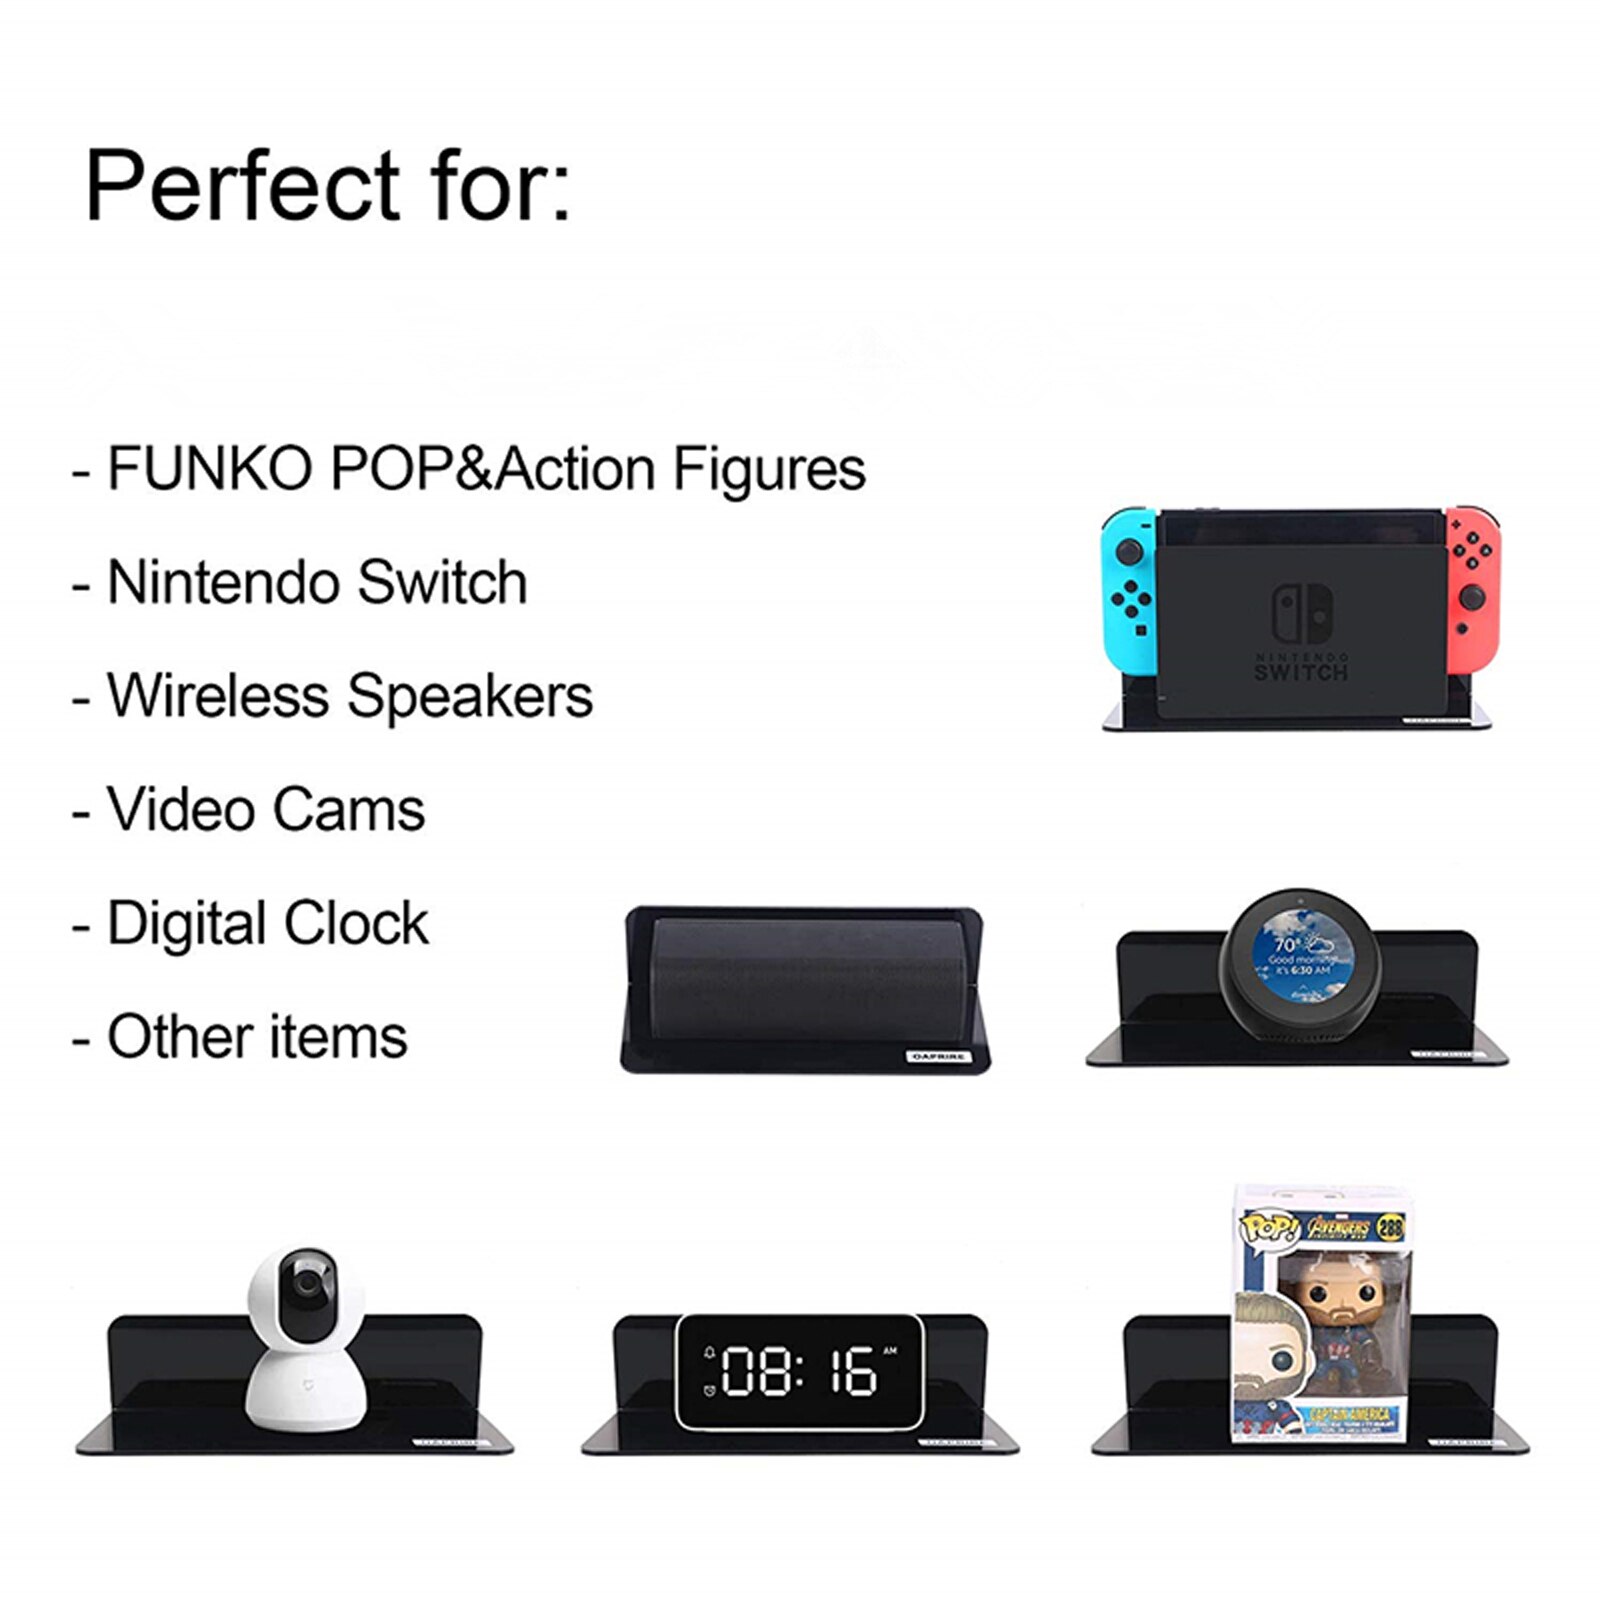 Acrylic Floating Wall Shelves Damage-Free Expand Wall Space Small Display Shelf For Switch/Smart Speaker/Action Figures